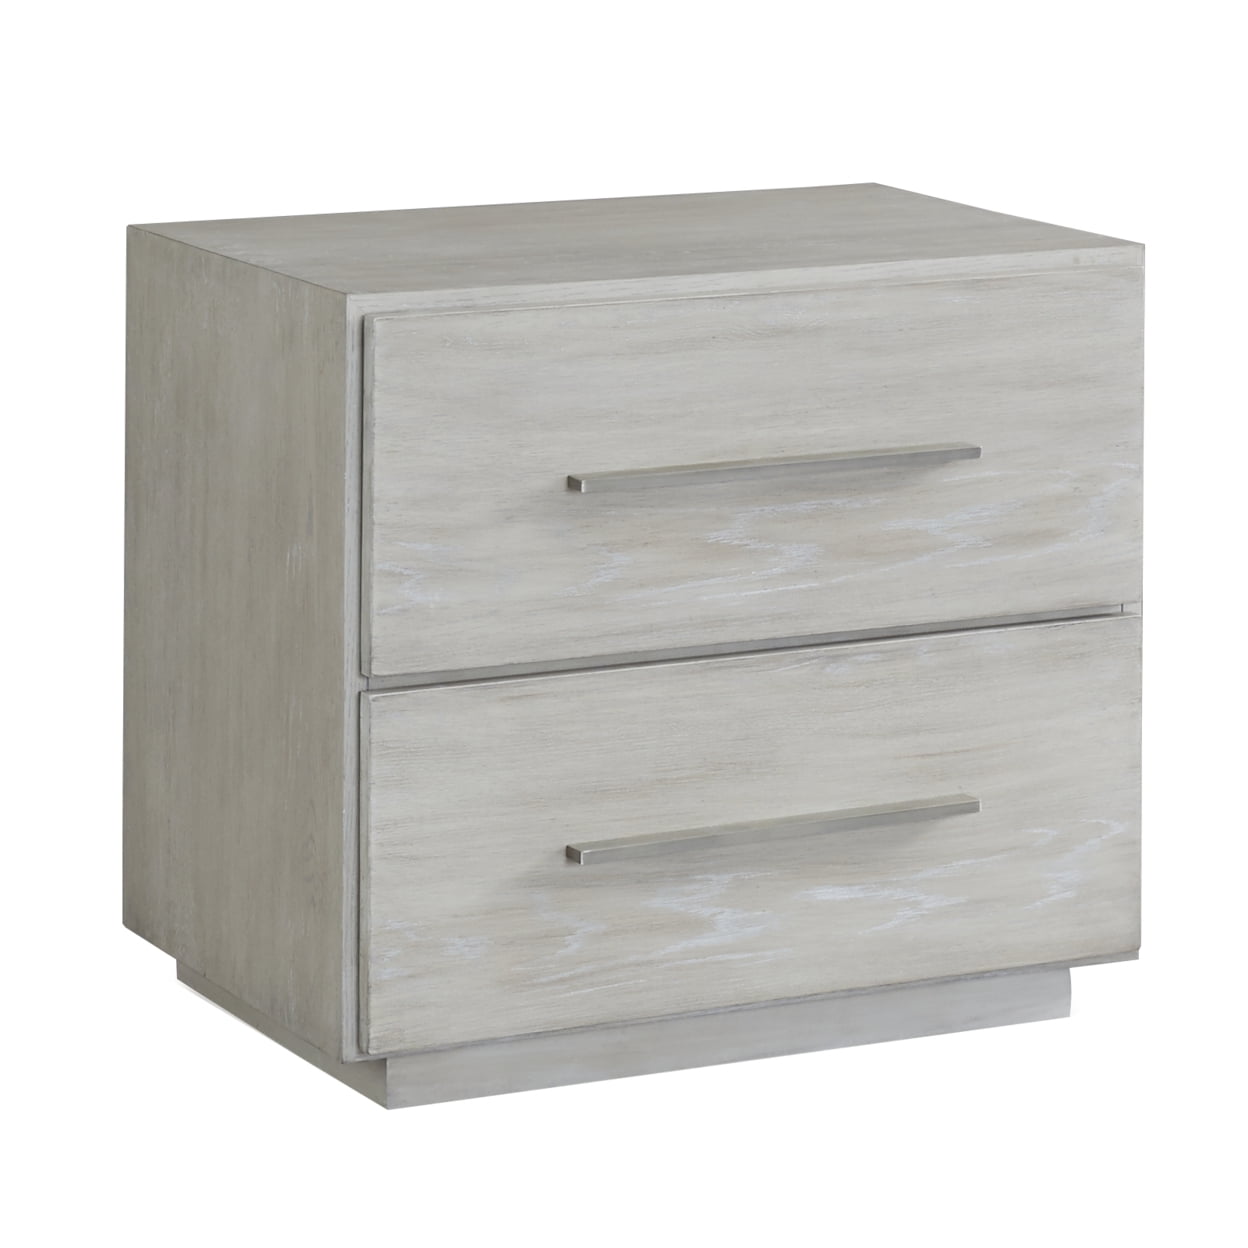 Picture of Benjara BM206638 2 Drawer Miter Front Wooden Nightstand with Bar Handles - Cotton Gray - 24 x 26 x 19 in.